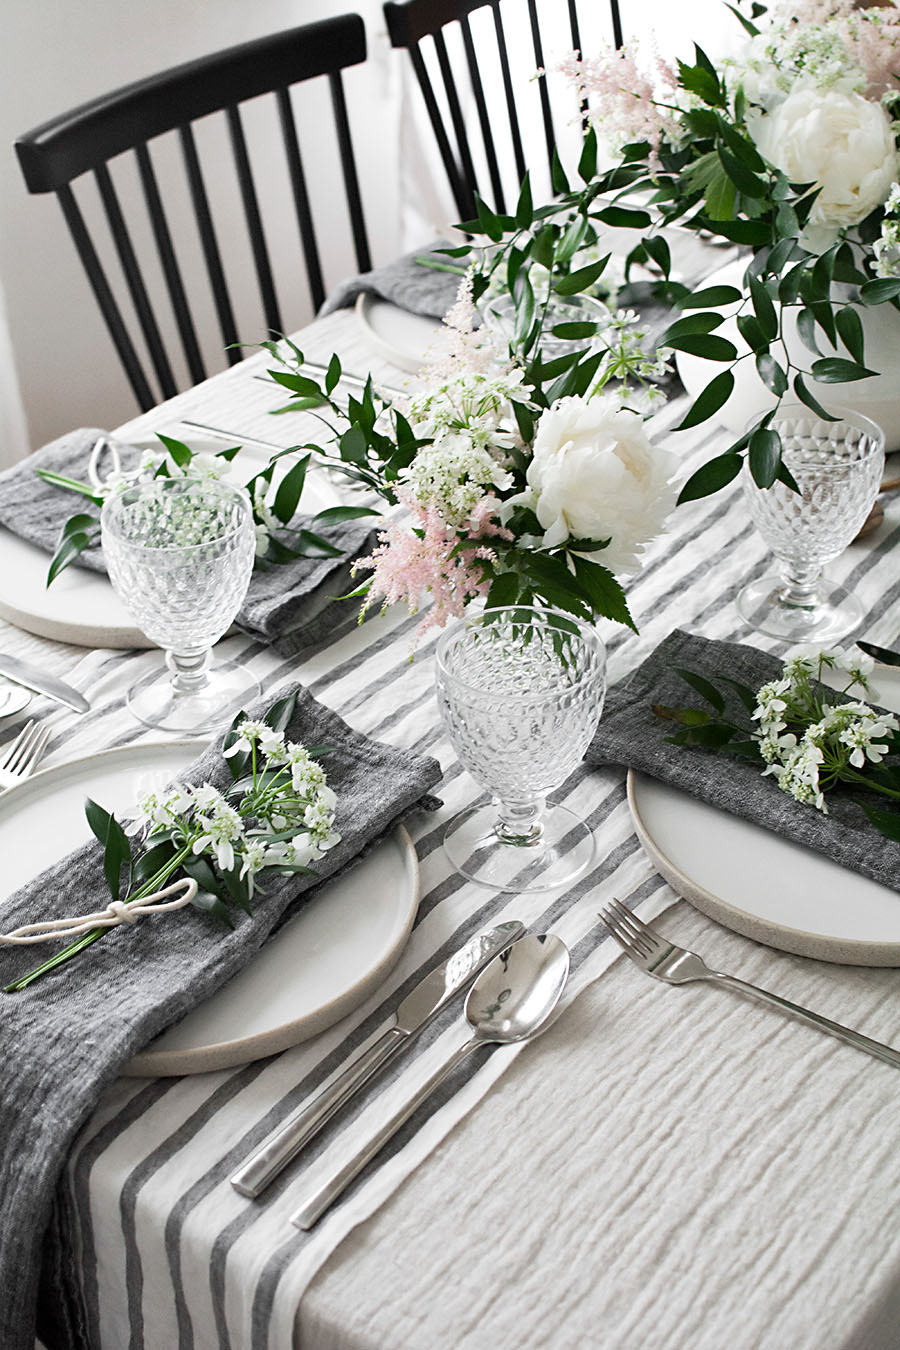 tabletop linens - Homey Oh My